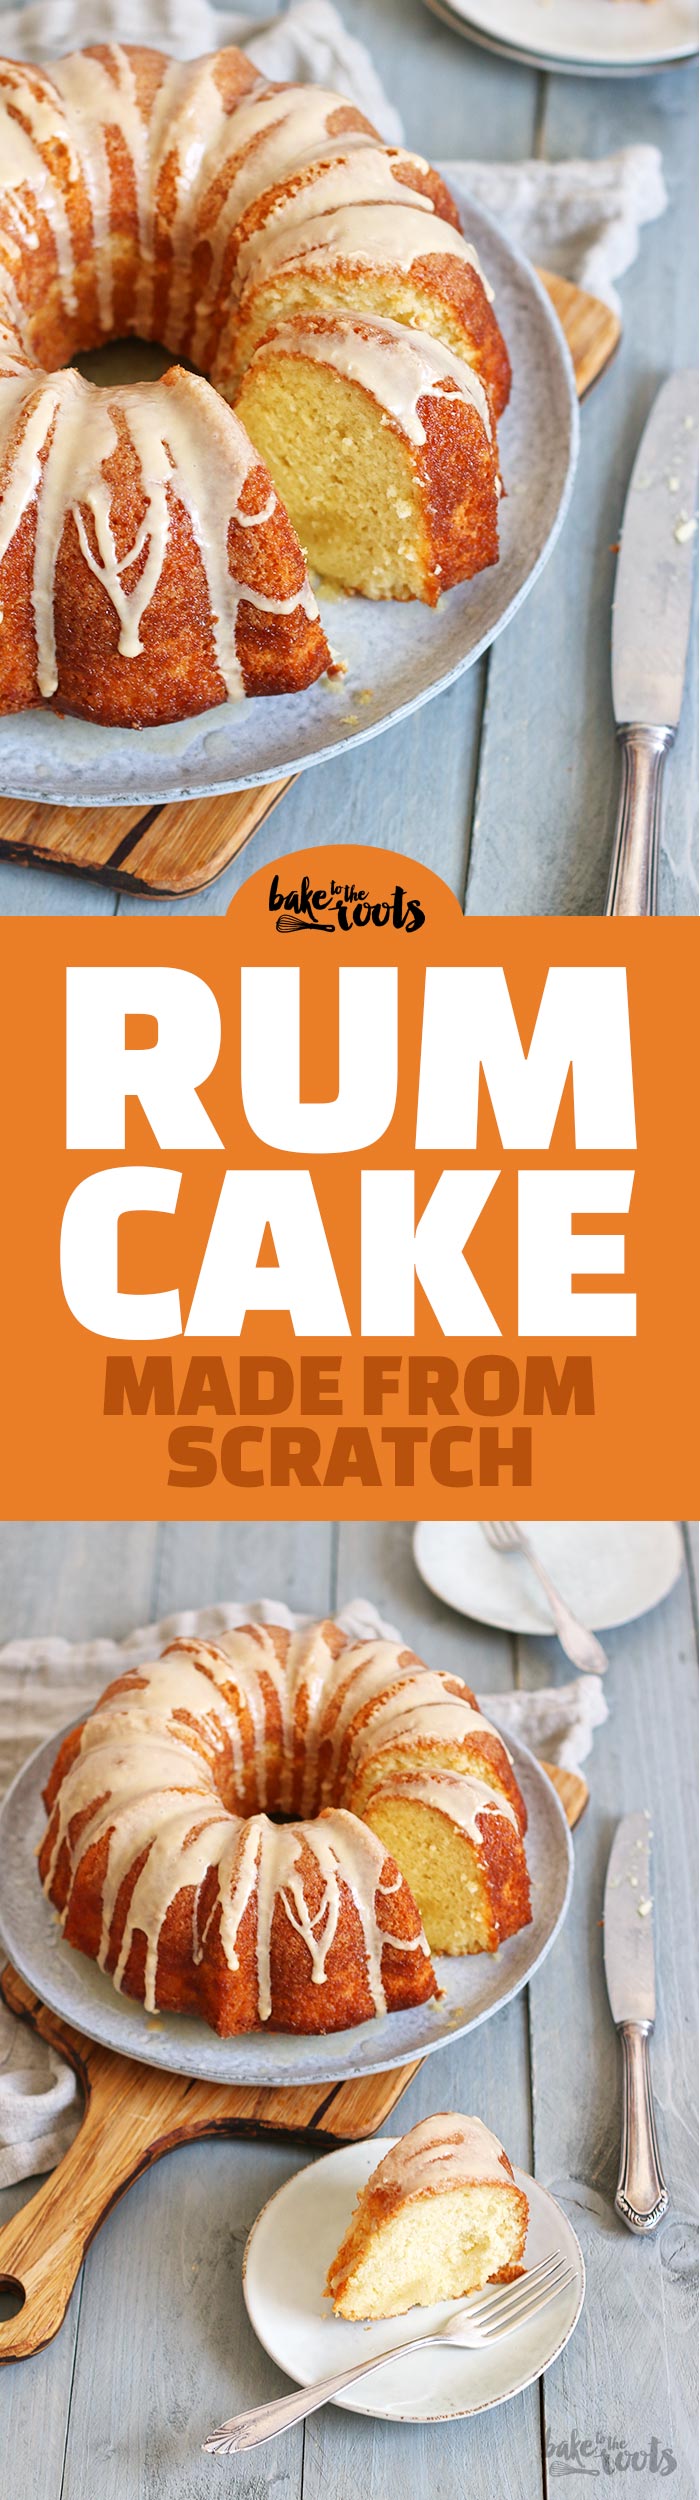 Rum Cake (made from scratch) | Bake to the roots